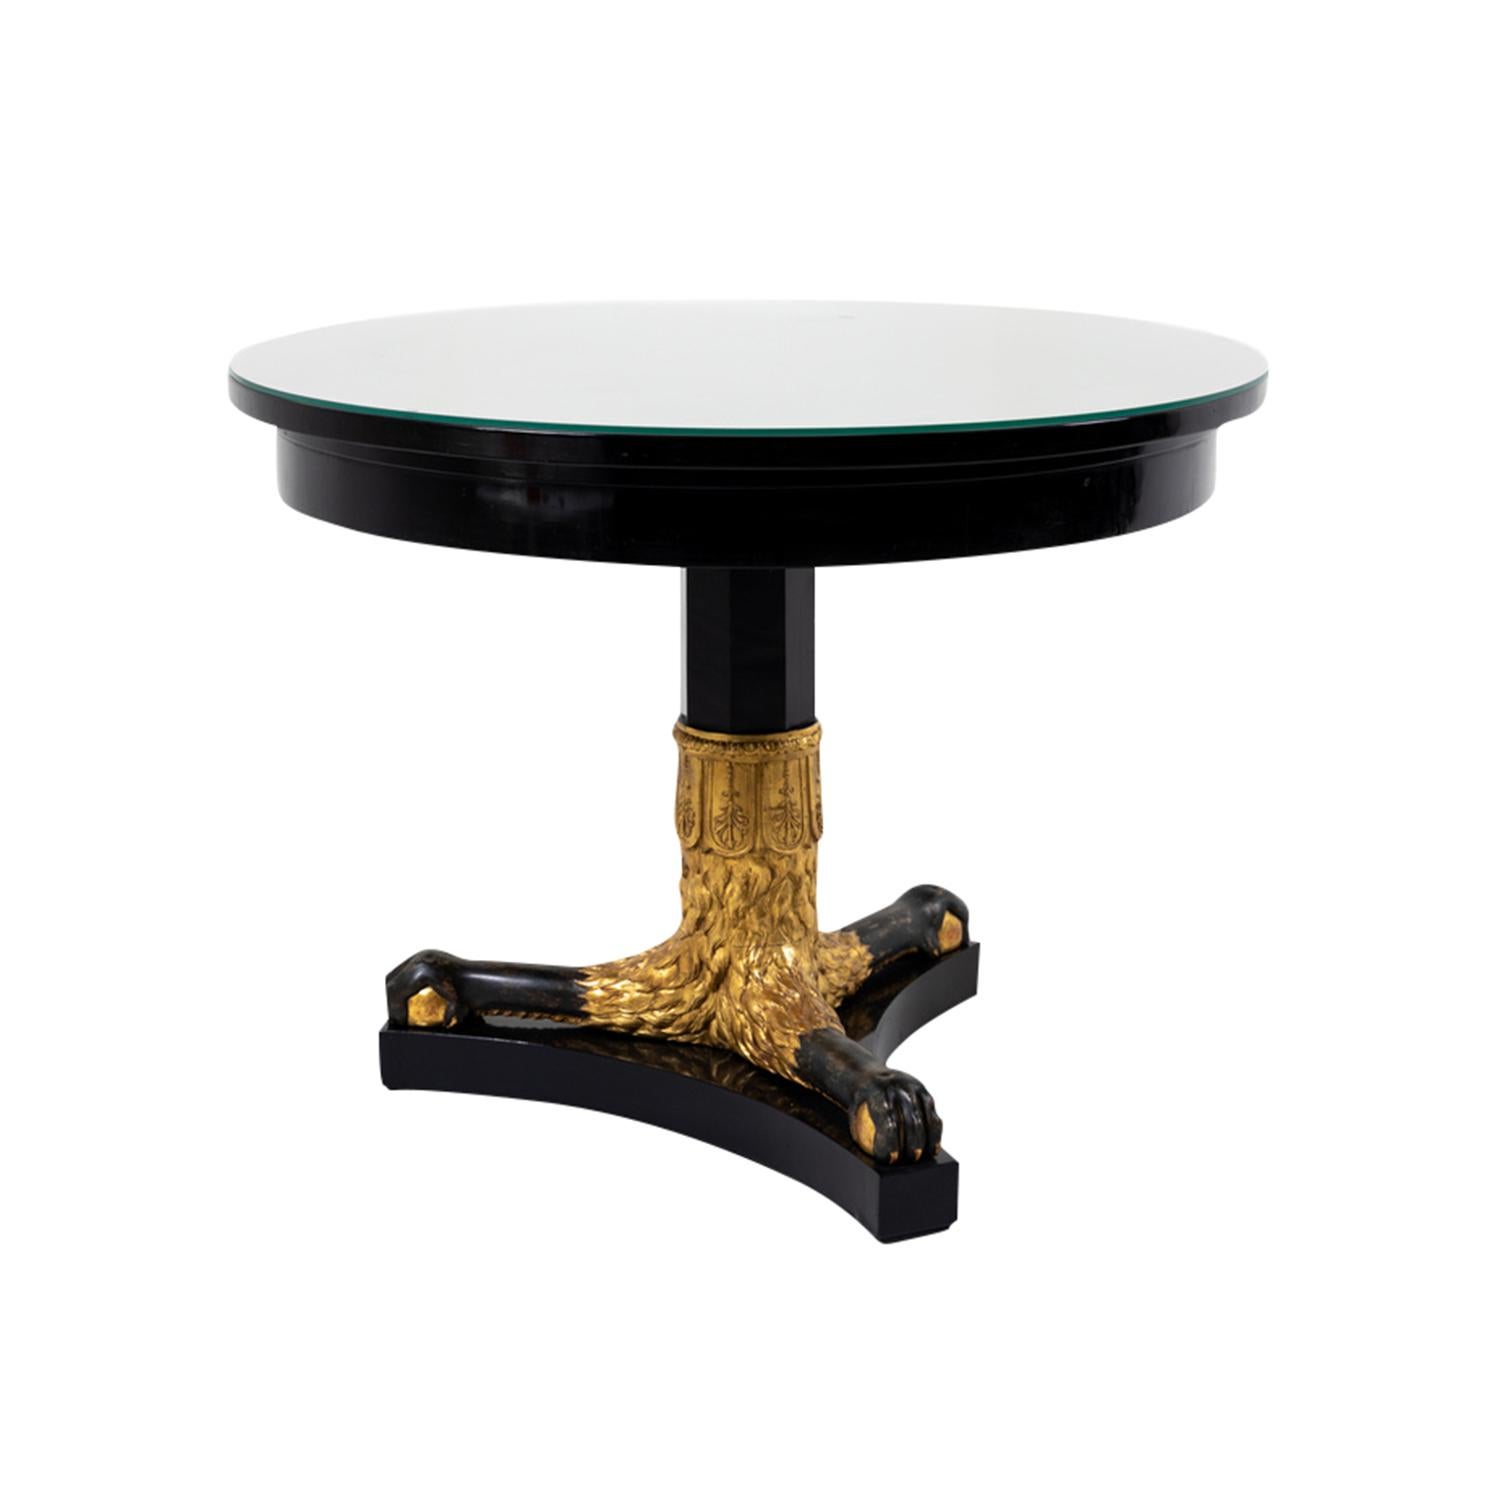 A black, antique French Empire sofa table made of hand crafted ebonized wood, in good condition. The round Parisian side table is composed with a shellac polished clear glass top to protect the surface, supported by a detailed carved gold-patinated